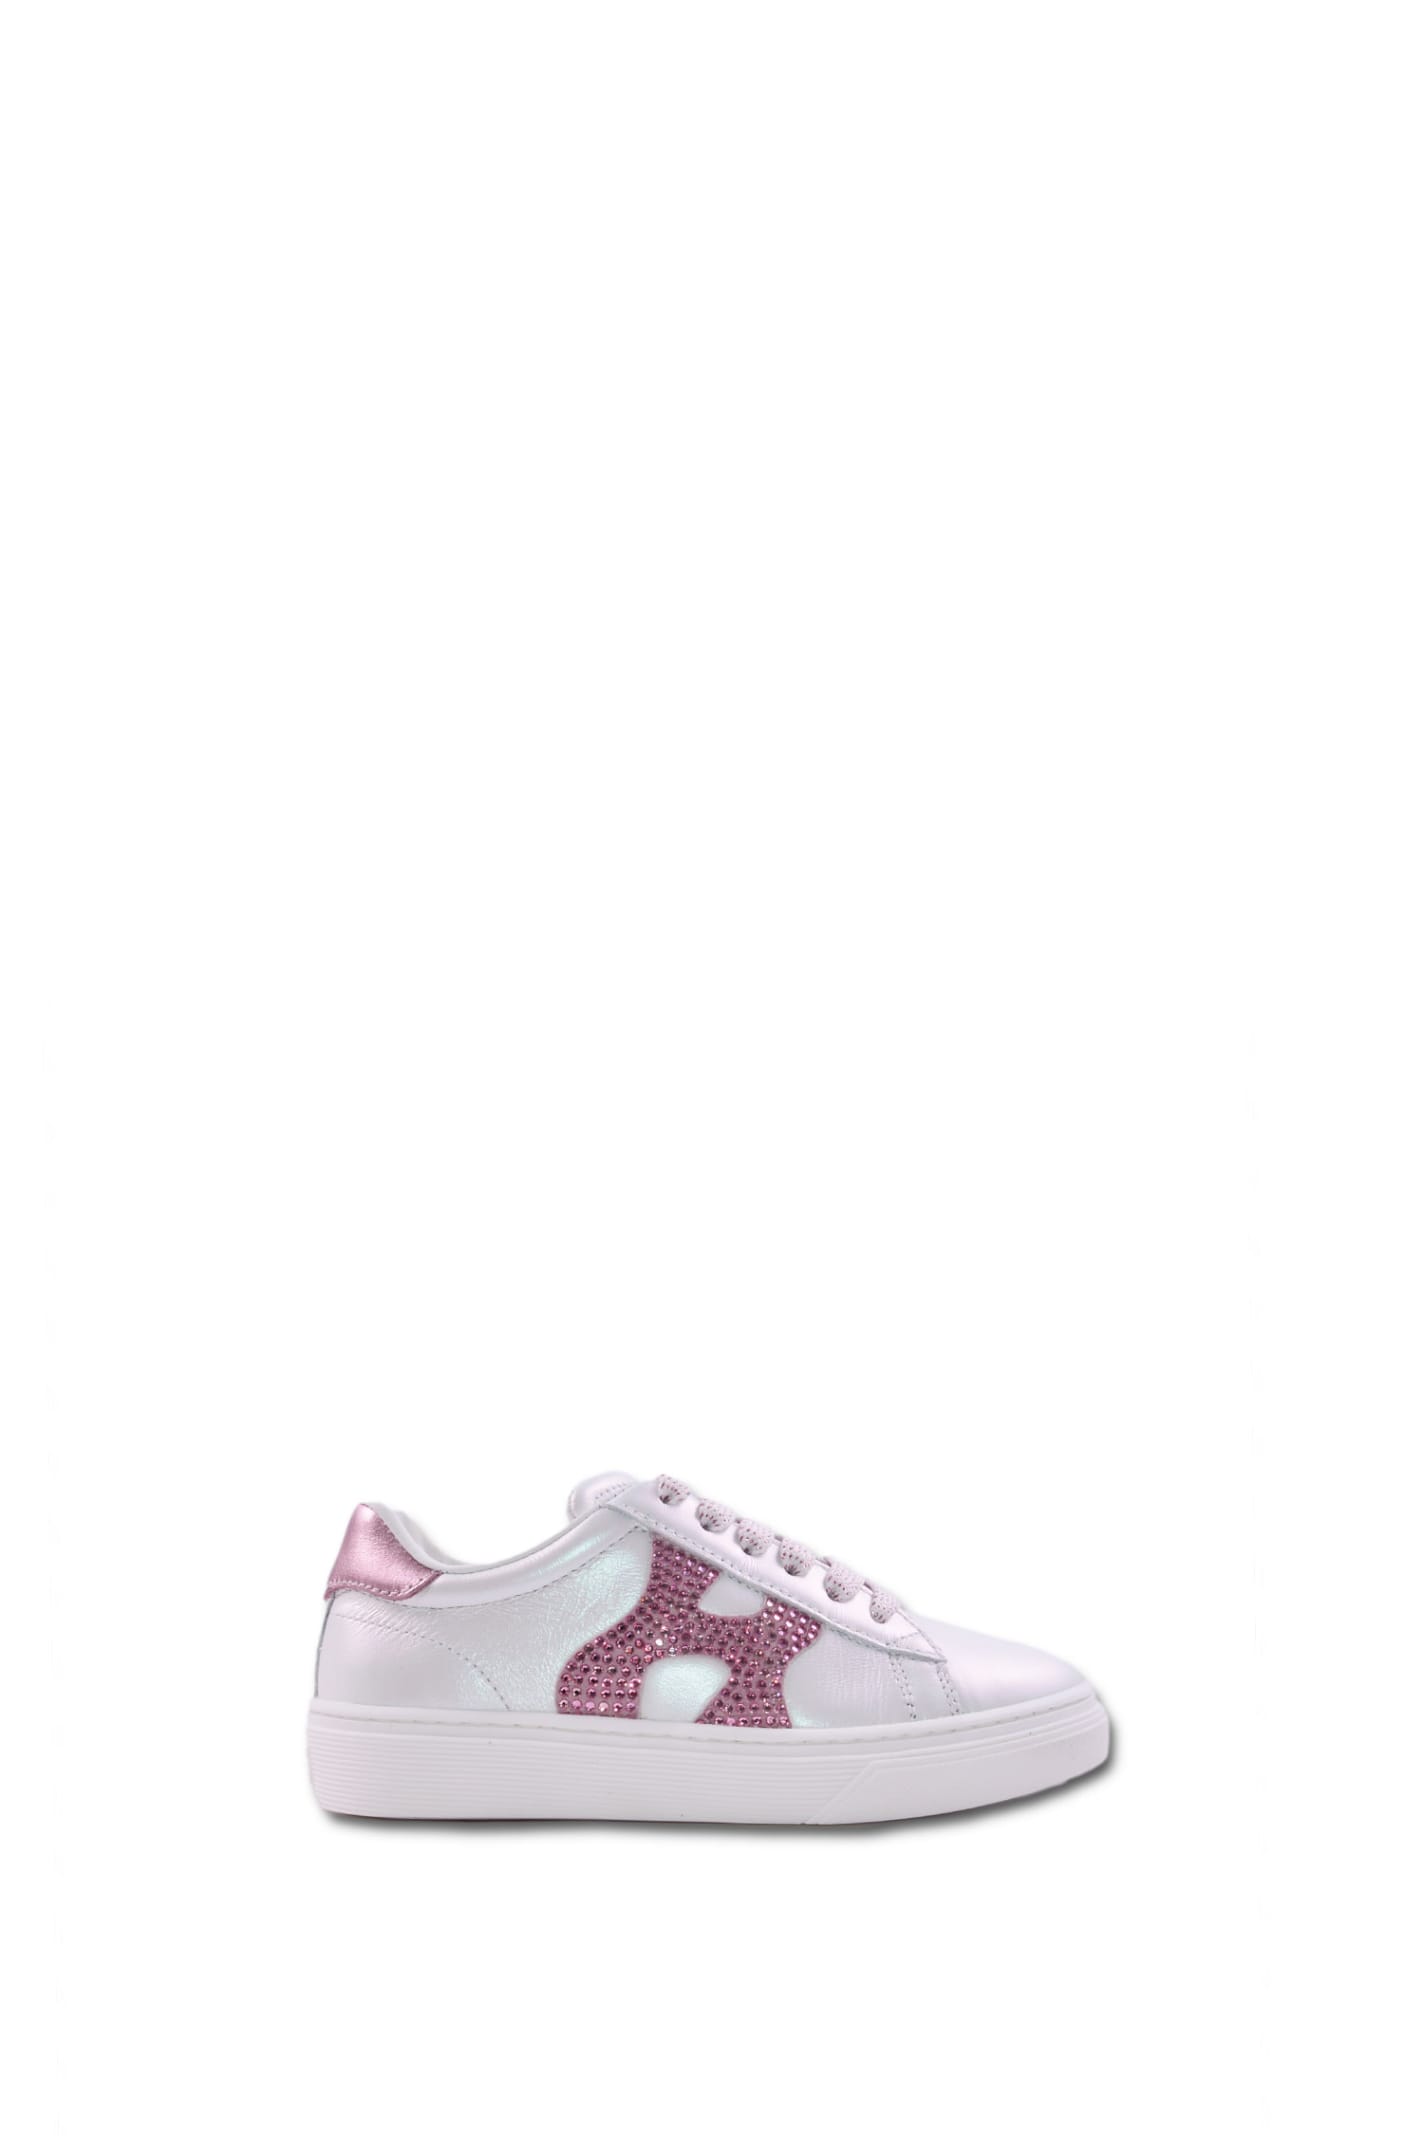 Hogan Kids'  Sneakers In Pearled Smooth Leather In White